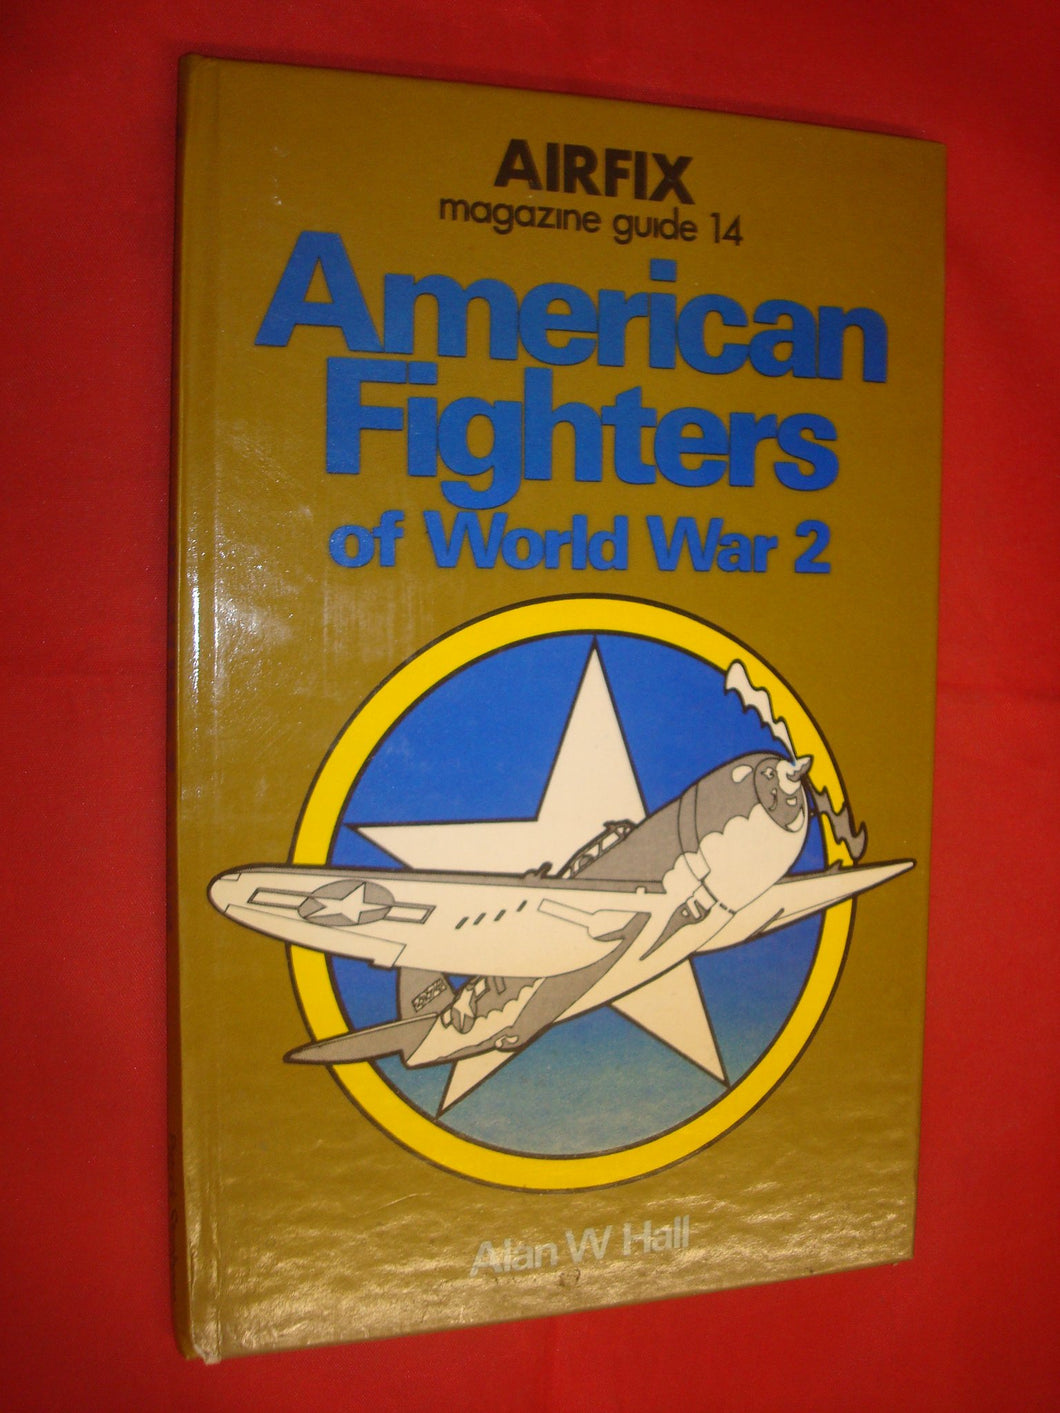 Airfix Magazine Guide 14 - American Fighters of World War 2 Hall, Alan W.